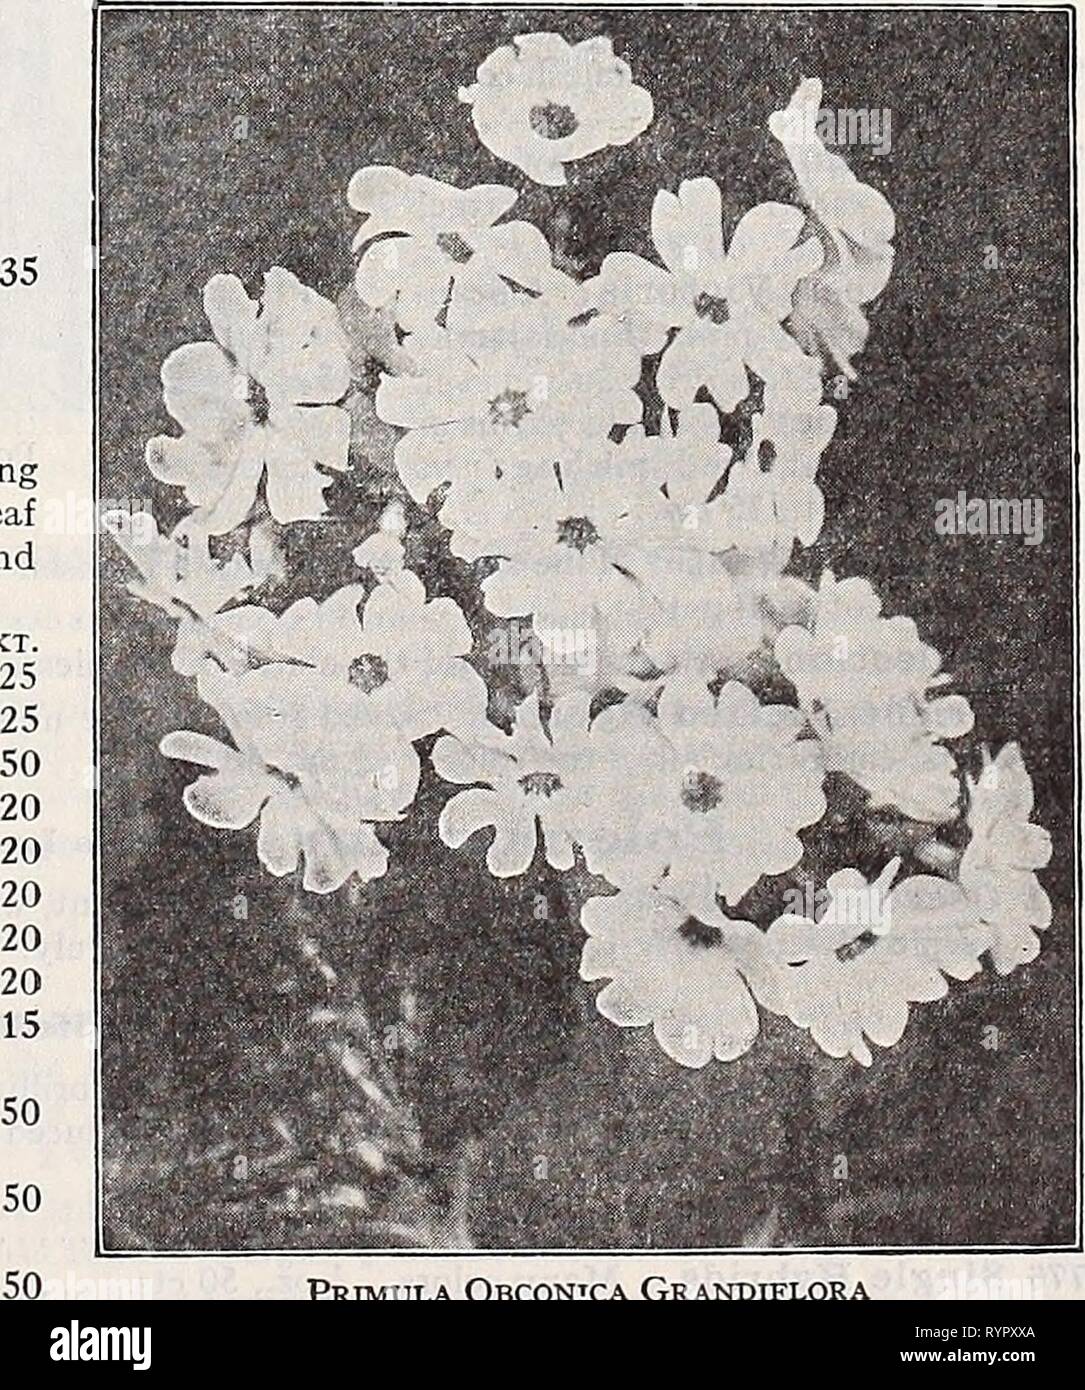 Dreer's midsummer list 1932 (1932) Dreer's midsummer list 1932 . dreersmidsummerl1932henr Year: 1932  : Dreer's 'Peerless' Chinese Primroses Primula (Primrose) The charming and beautiful Chinese Fringed Primrose and Obconica varieties are indispensable for winter or spring decora- tions in the home or conservatory. They are one of the most im- portant winter blooming pot plants. Dreer's 'Peerless' Chinese Primroses PER pkt. 3784 Peerless Blue (True Blue) $0 50 35 35 35 35 3785 -White (Brook's White). Pure white 3787 -Pink (Delicata). Soft pink 3783 —Scarlet {Chiswick Red Imp.). Rich scarlet 37 Stock Photo